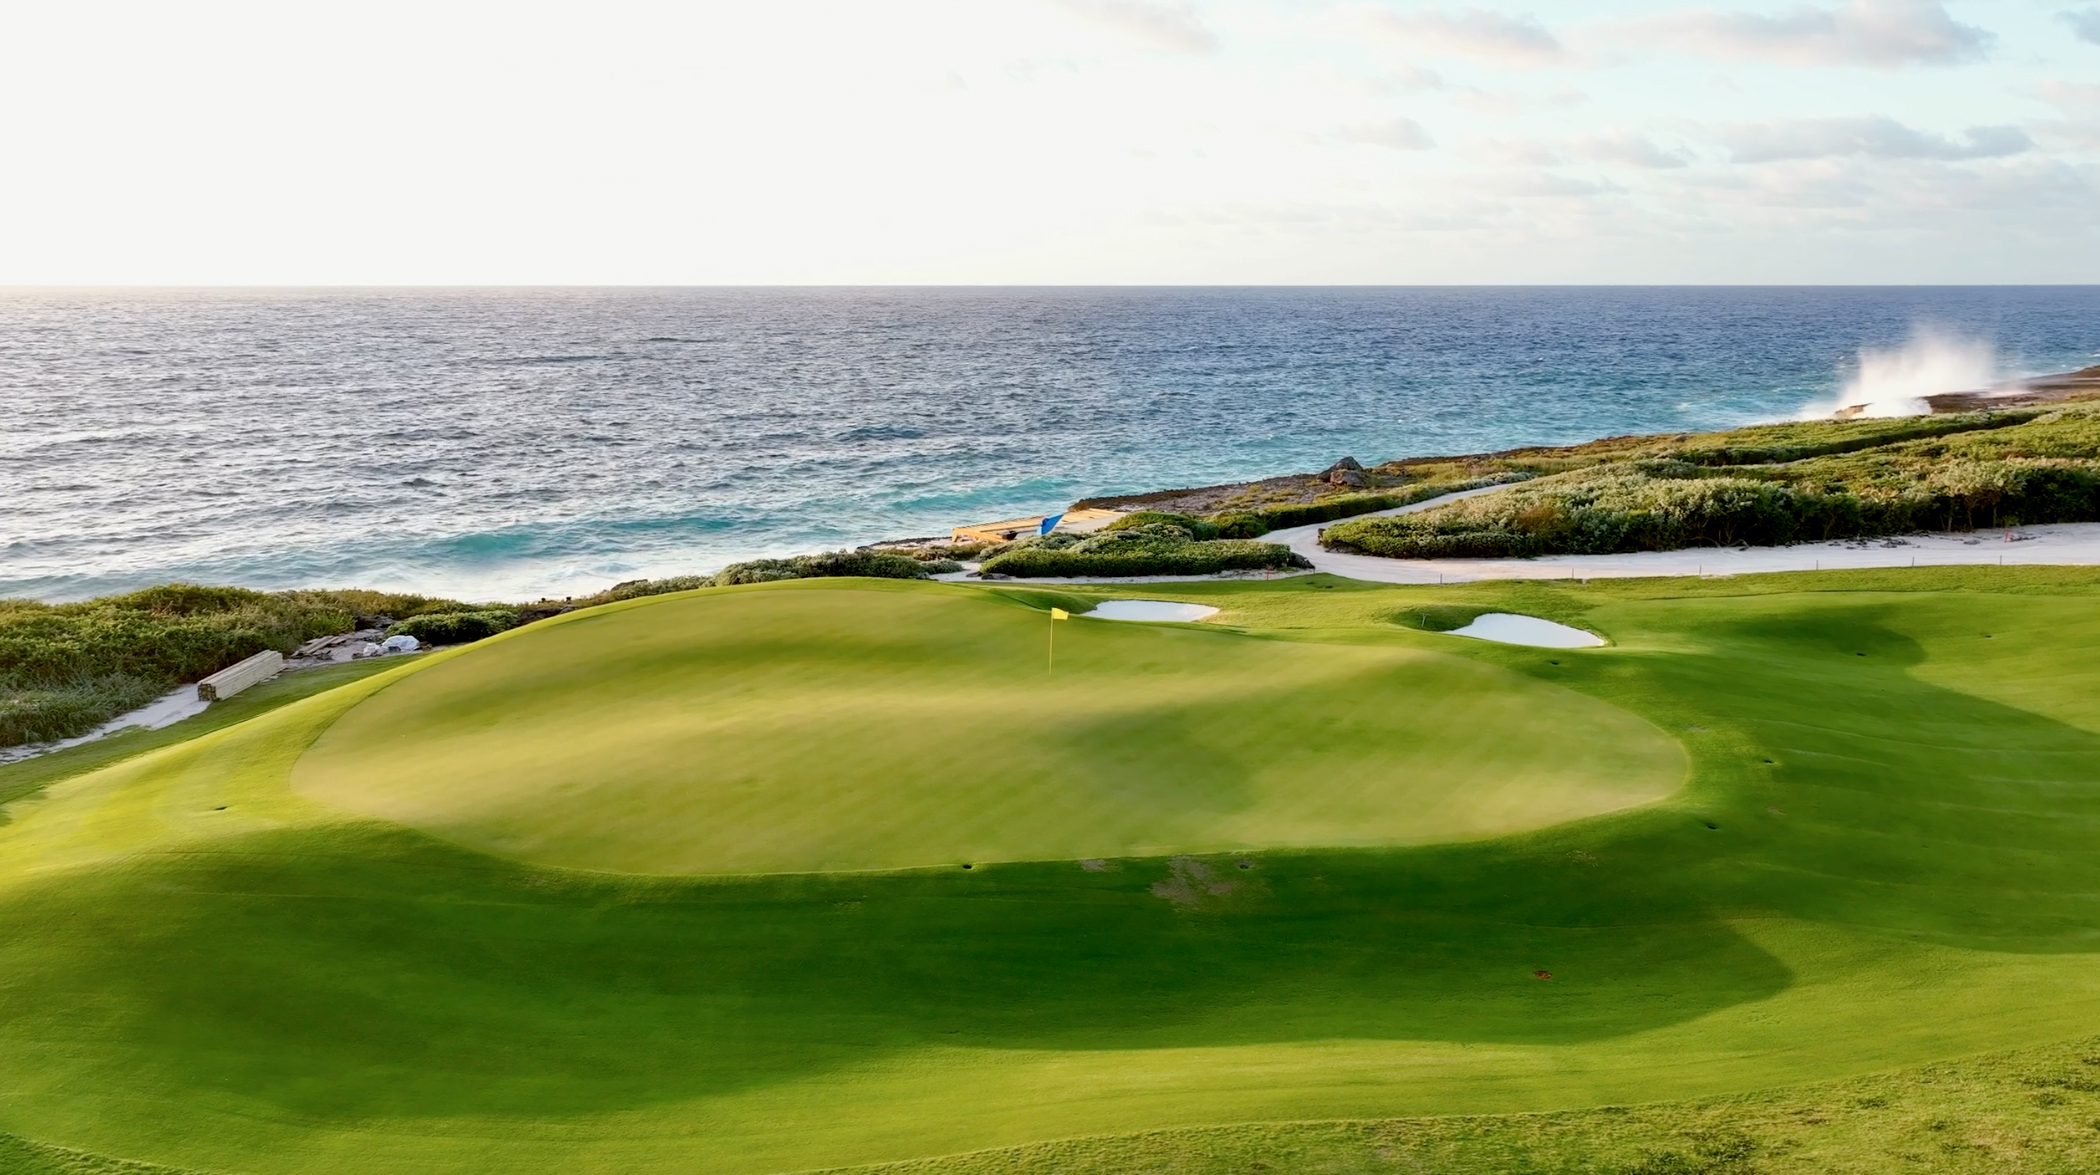 Scenic view of a golf green at The Abaco Club with ocean spray in the background, blending sport and the natural beauty of the Bahamas